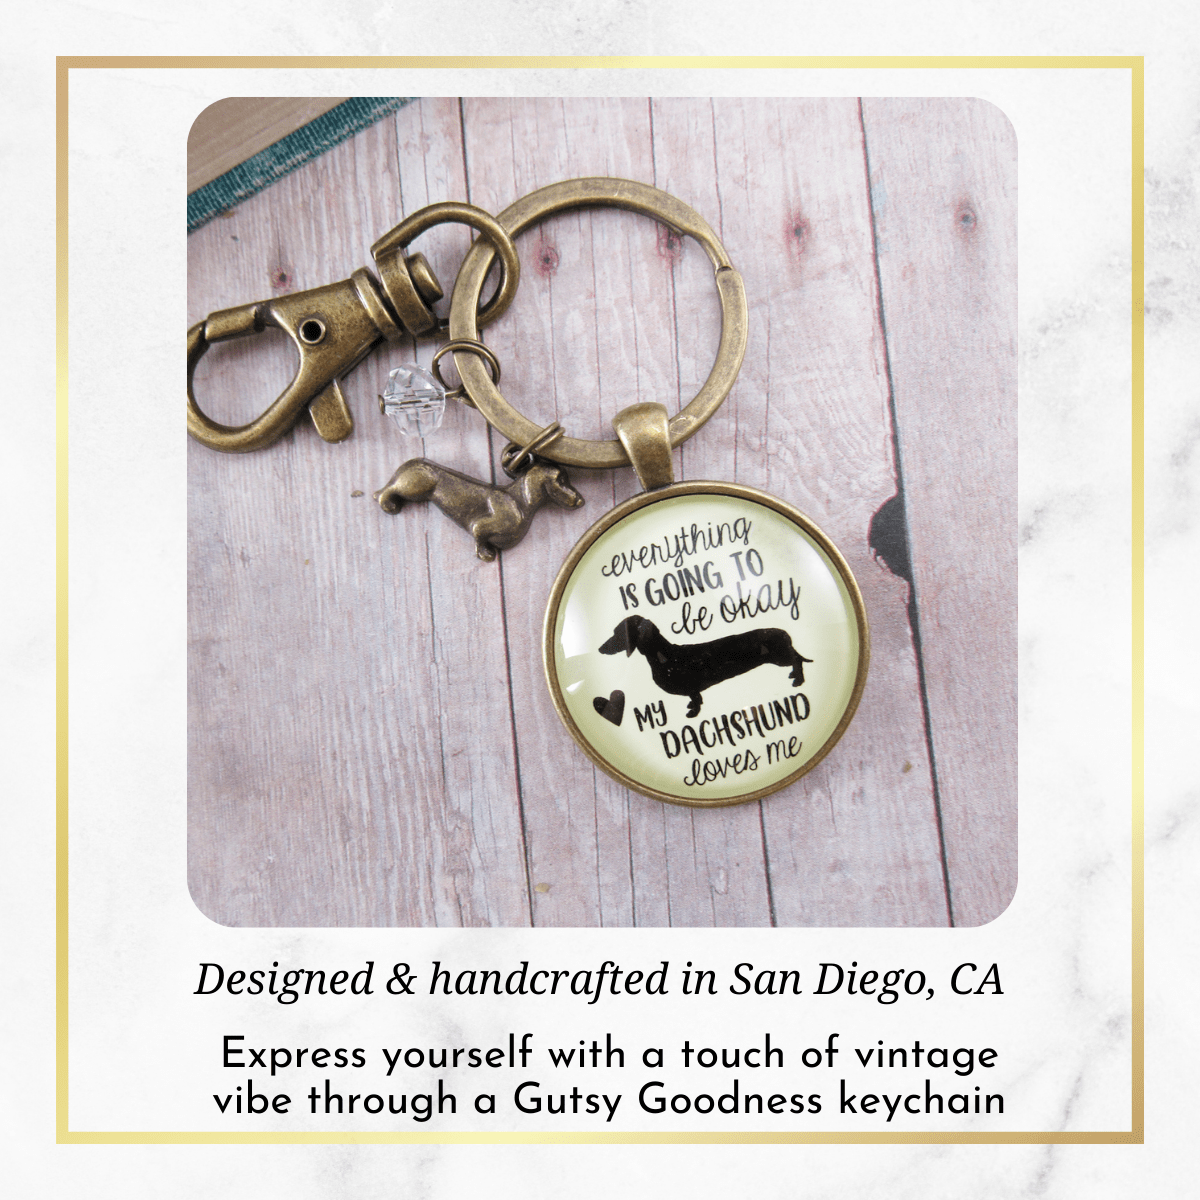 Dachshund Keychain Everything is Going to Be Okay My Dachshund Loves Me Dog Mom Jewelry Gift - Gutsy Goodness Handmade Jewelry;Dachshund Keychain Everything Is Going To Be Okay My Dachshund Loves Me Dog Mom Jewelry Gift - Gutsy Goodness Handmade Jewelry Gifts